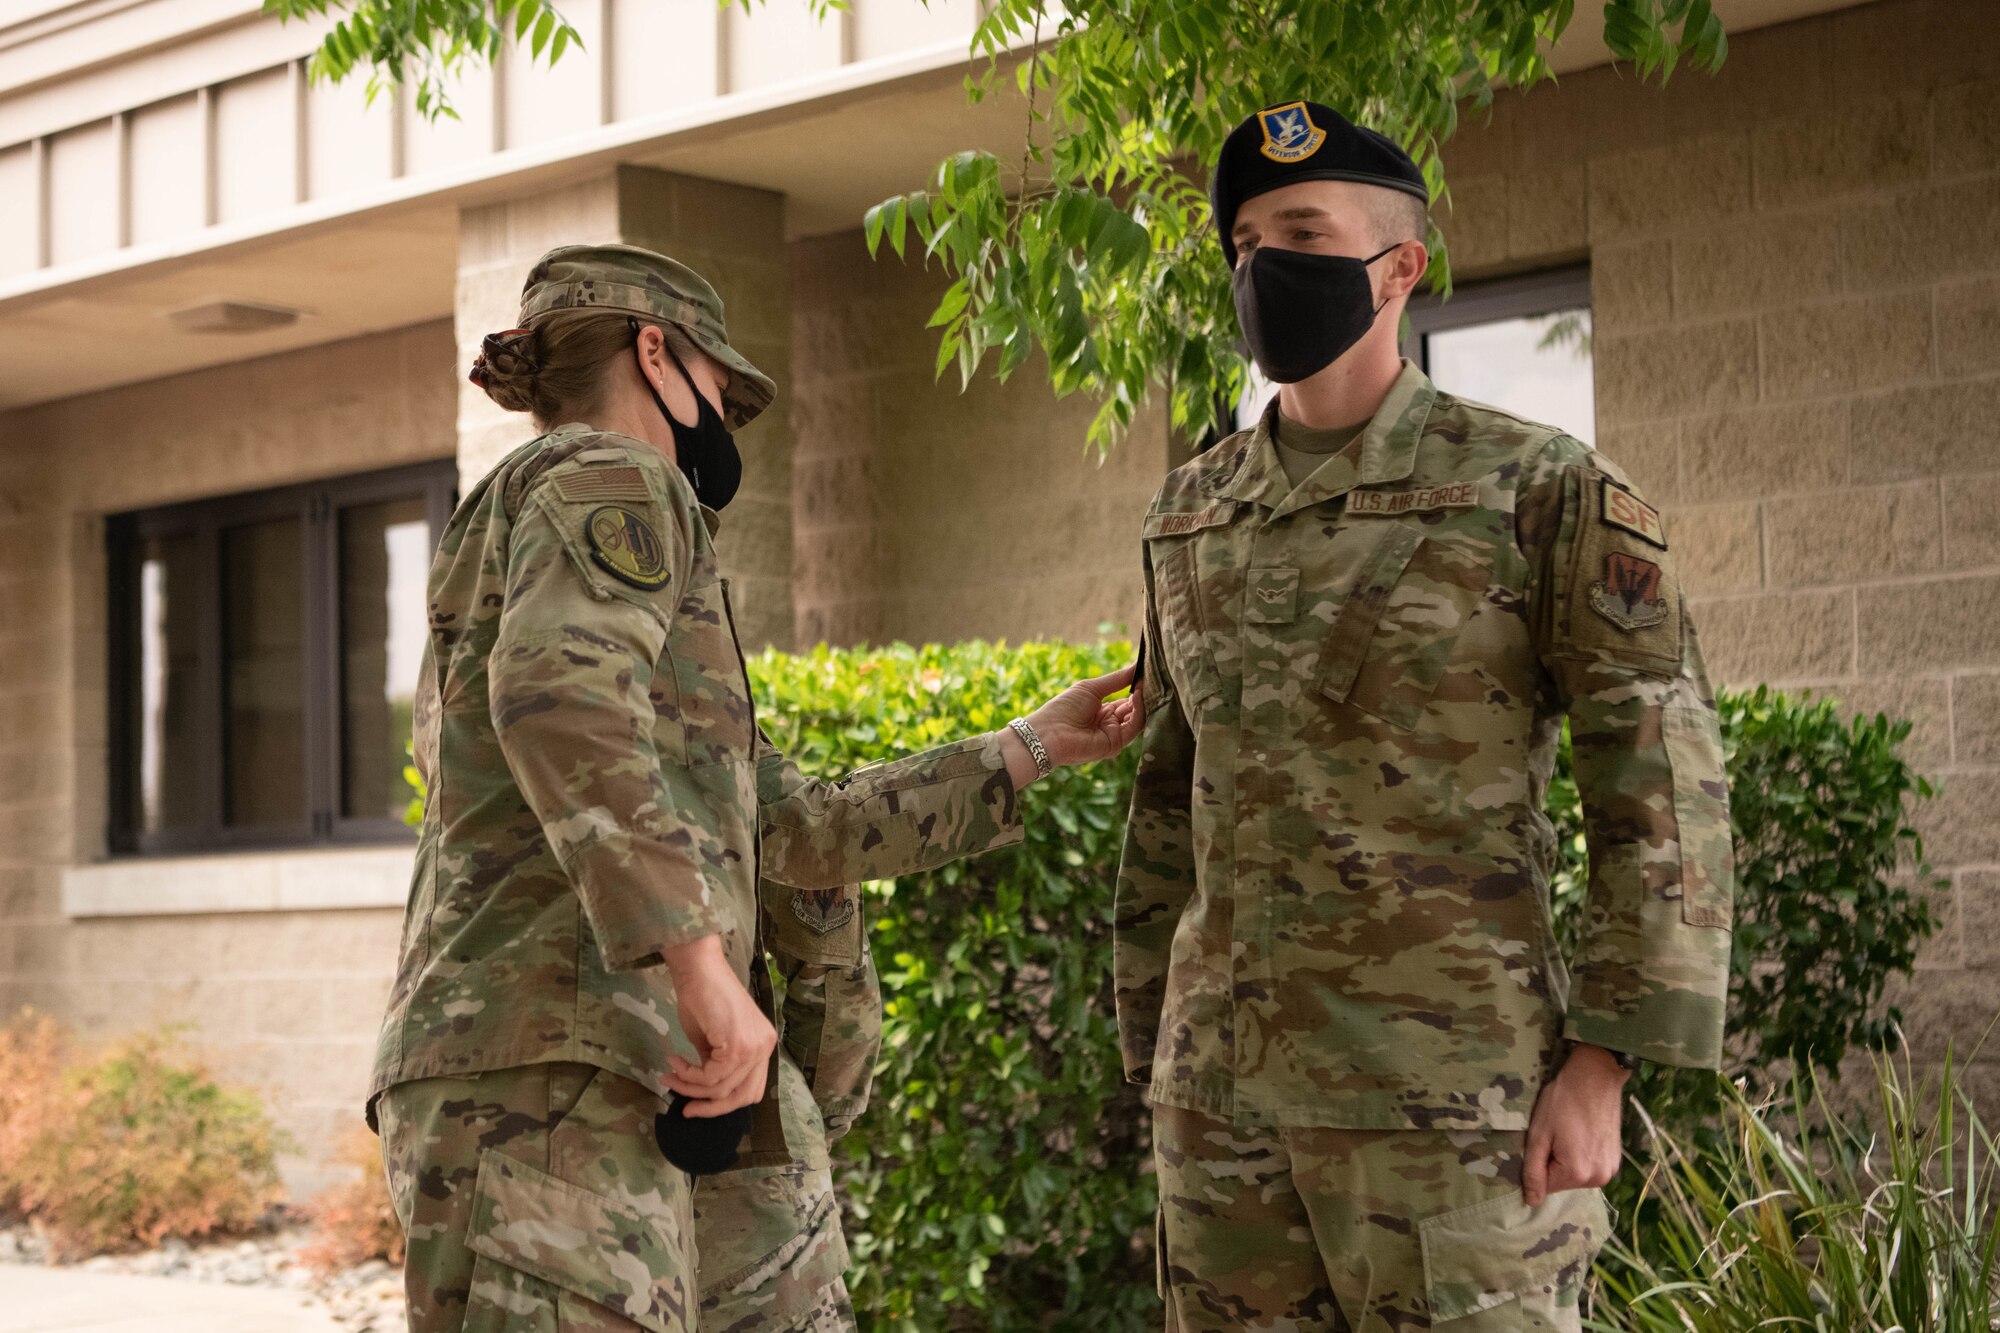 Col. Heather Fox, 9th Reconnaissance Wing commander, left, gives a patch to Airman Samuel Workman, 9th Security Forces Squadron installation entry controller, Aug. 18, 2021, at Beale Air Force Base, California.